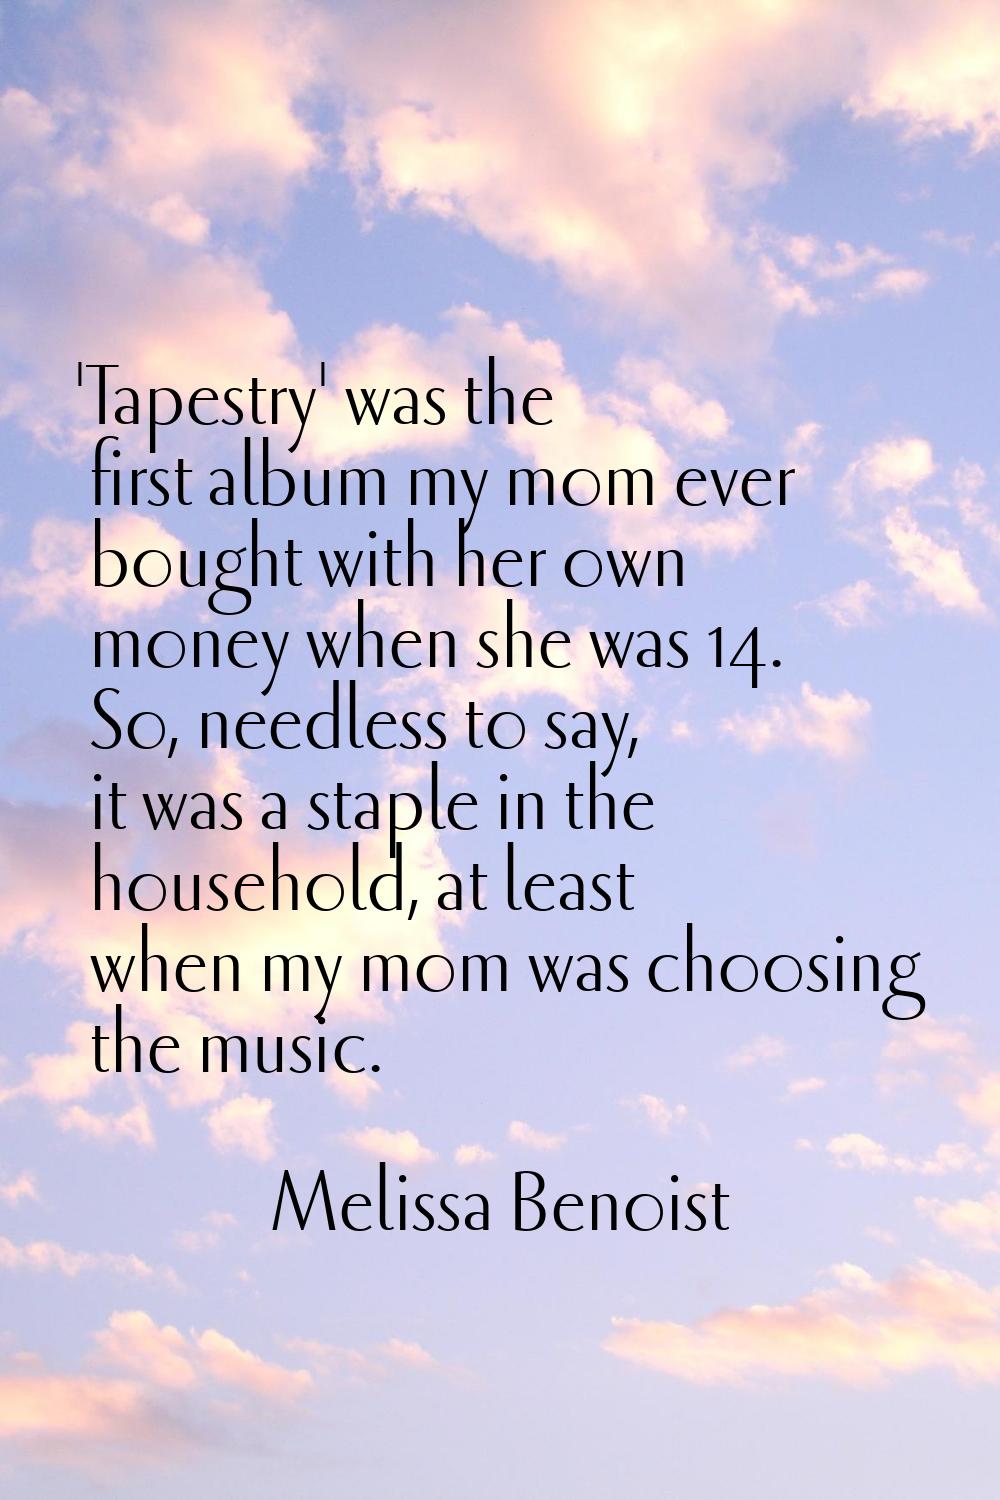 'Tapestry' was the first album my mom ever bought with her own money when she was 14. So, needless 